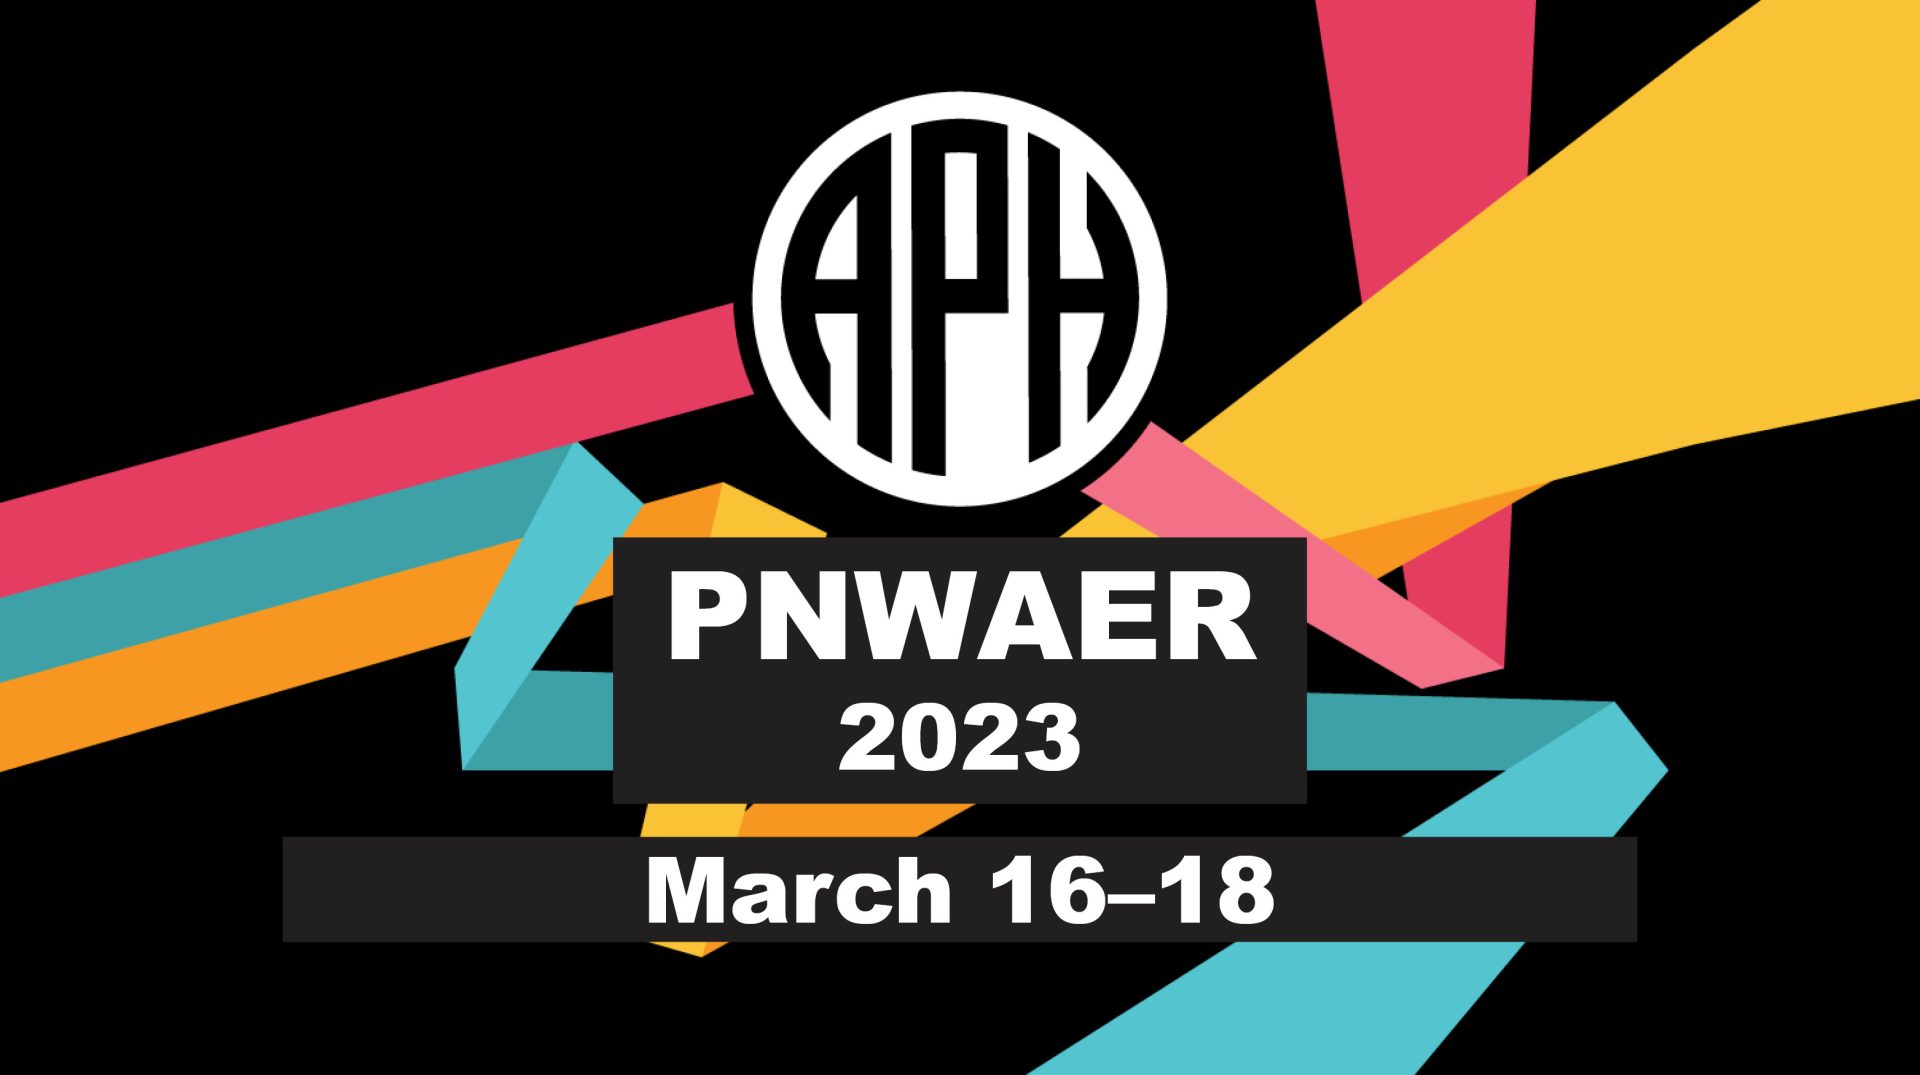 APH event banner. Three parallel bars in the APH brand colors of pomegranate, teal, and gold diverge and zigzag dynamically behind the APH logo. Text reads: PNWAER 2023, March 16 - 18.